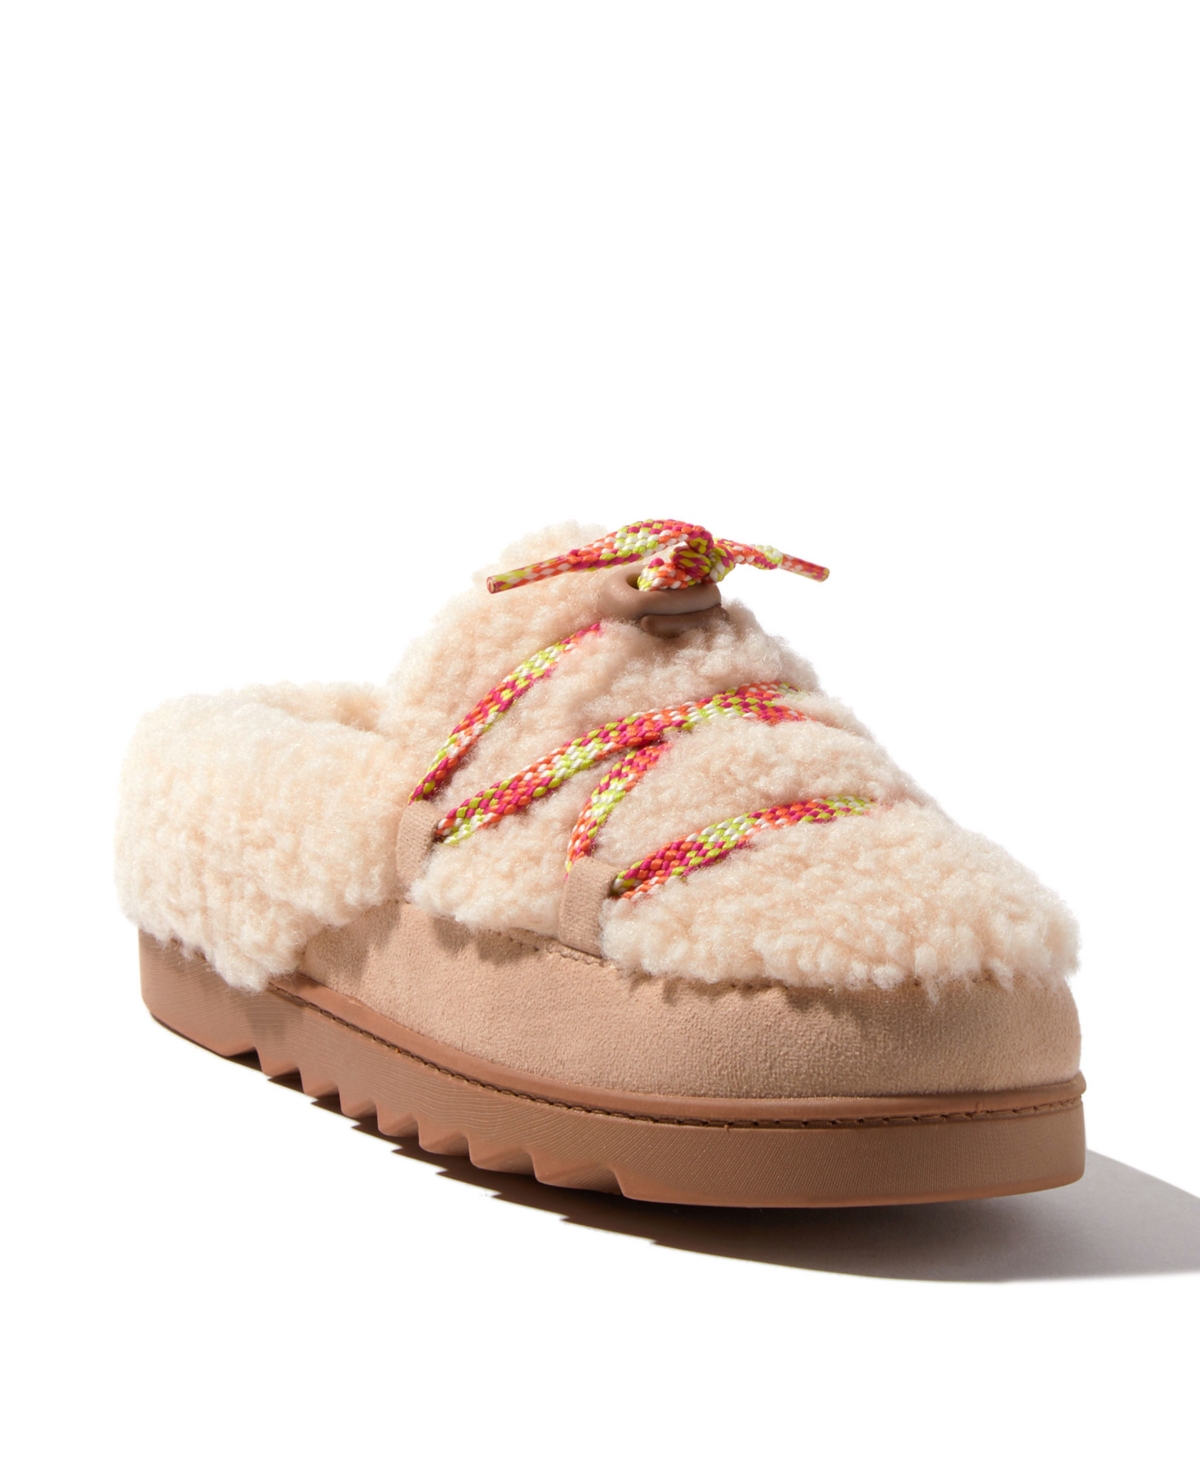 Women's Giselle Lace Up Teddy Mule Slippers - CrÃ¨me Brulee